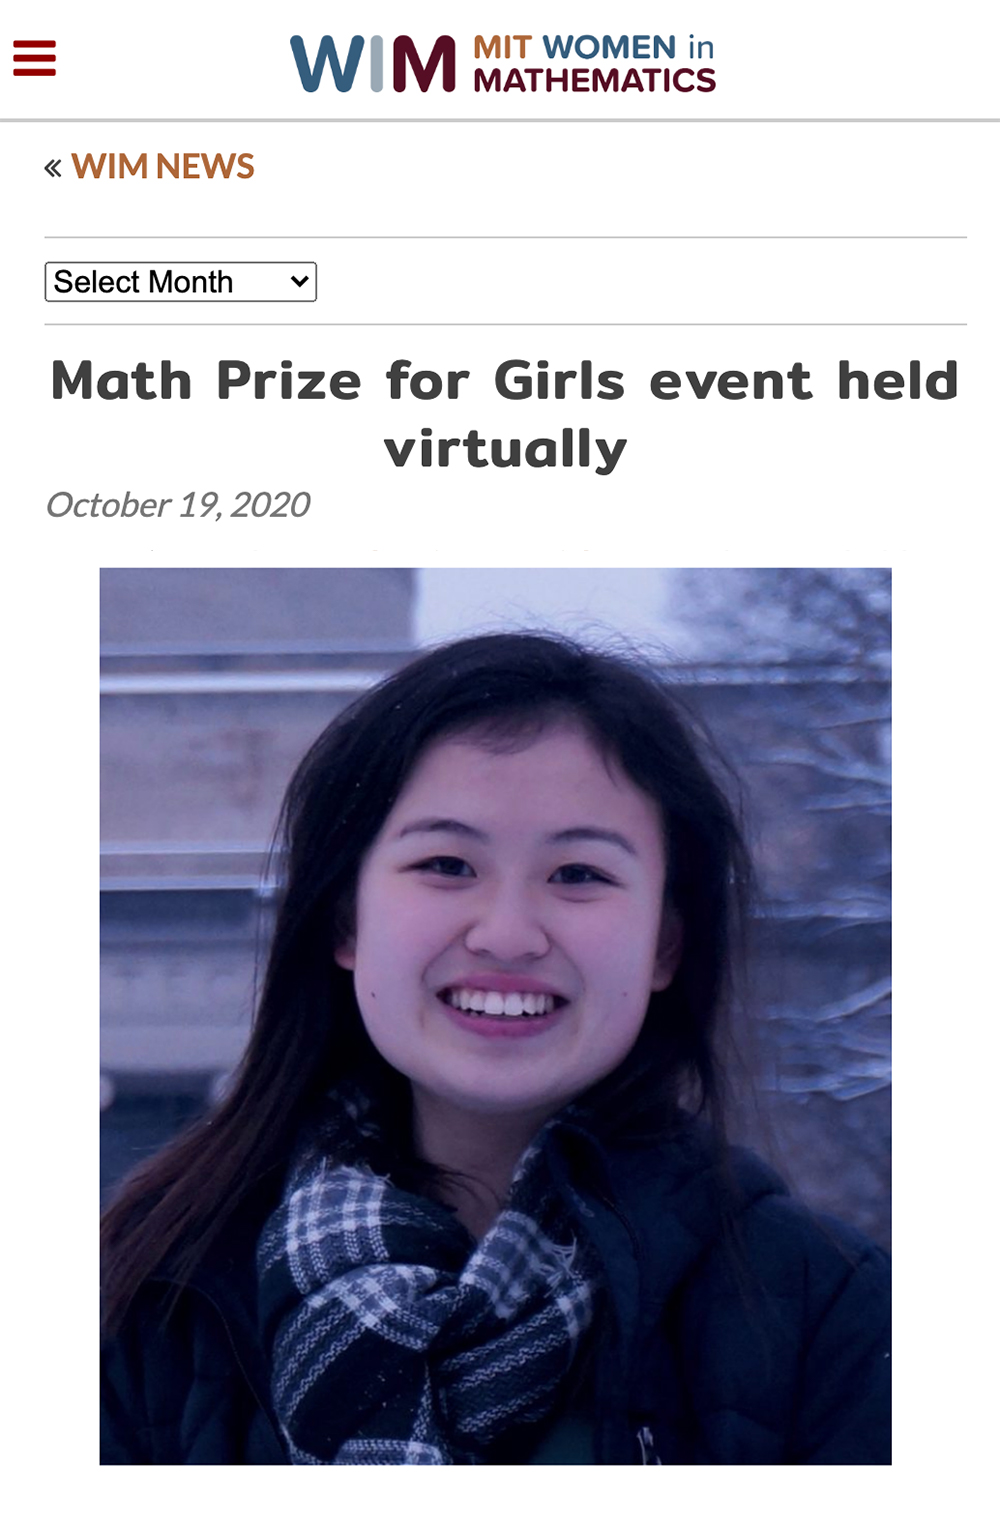 Math Prize for Girls event held virtually